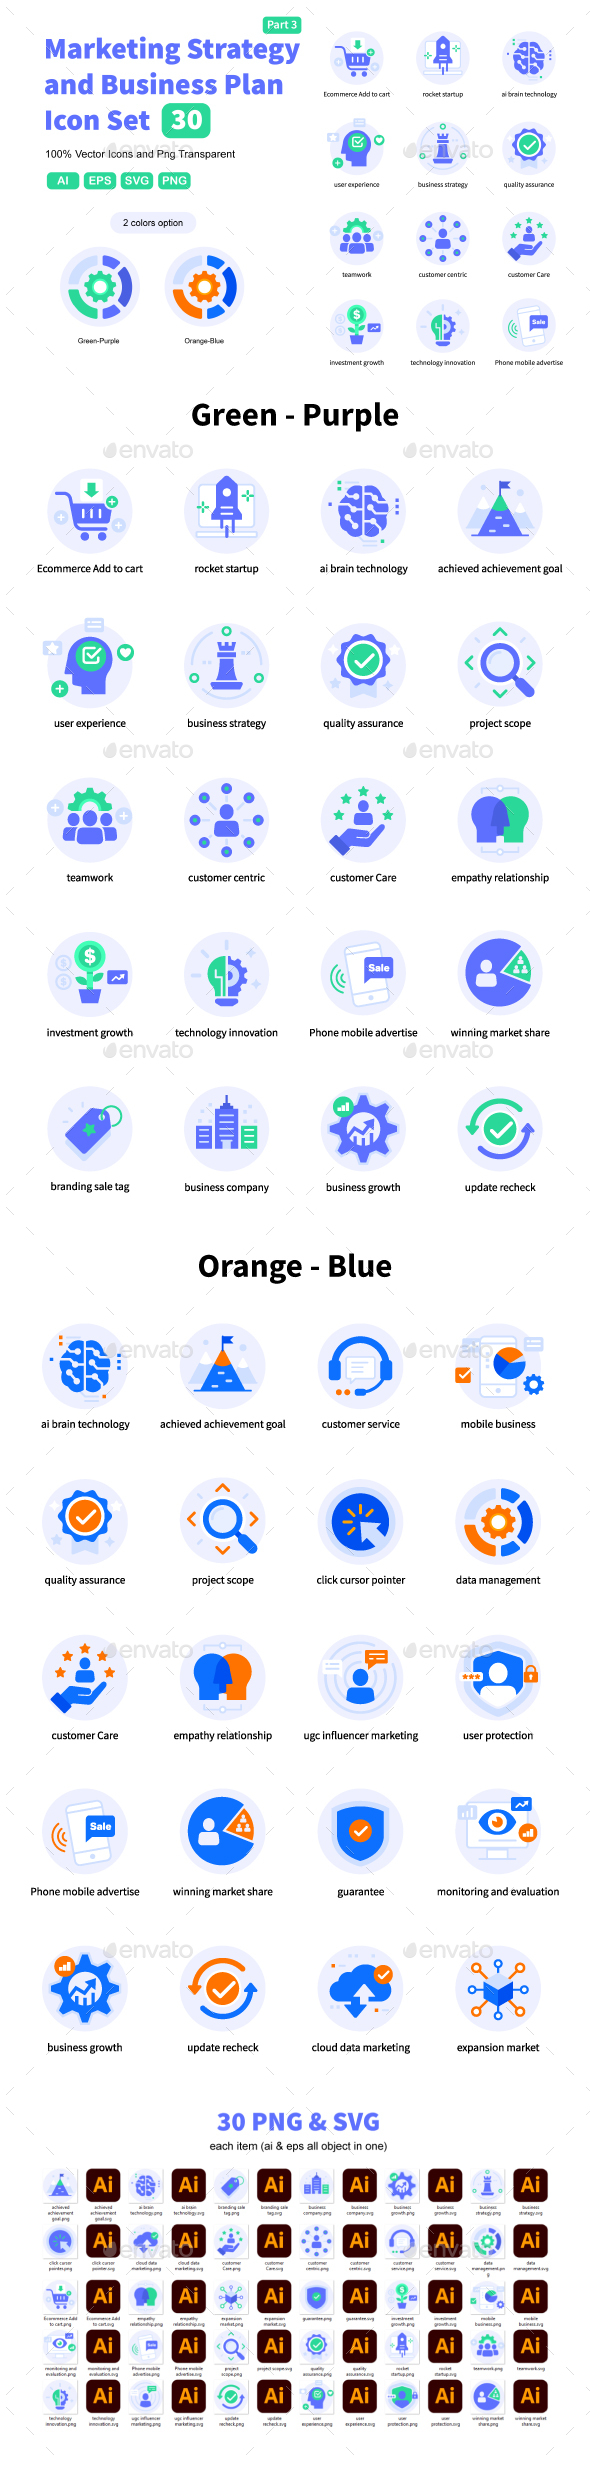 Marketing Strategy and Business Plan Icon Set Part 3